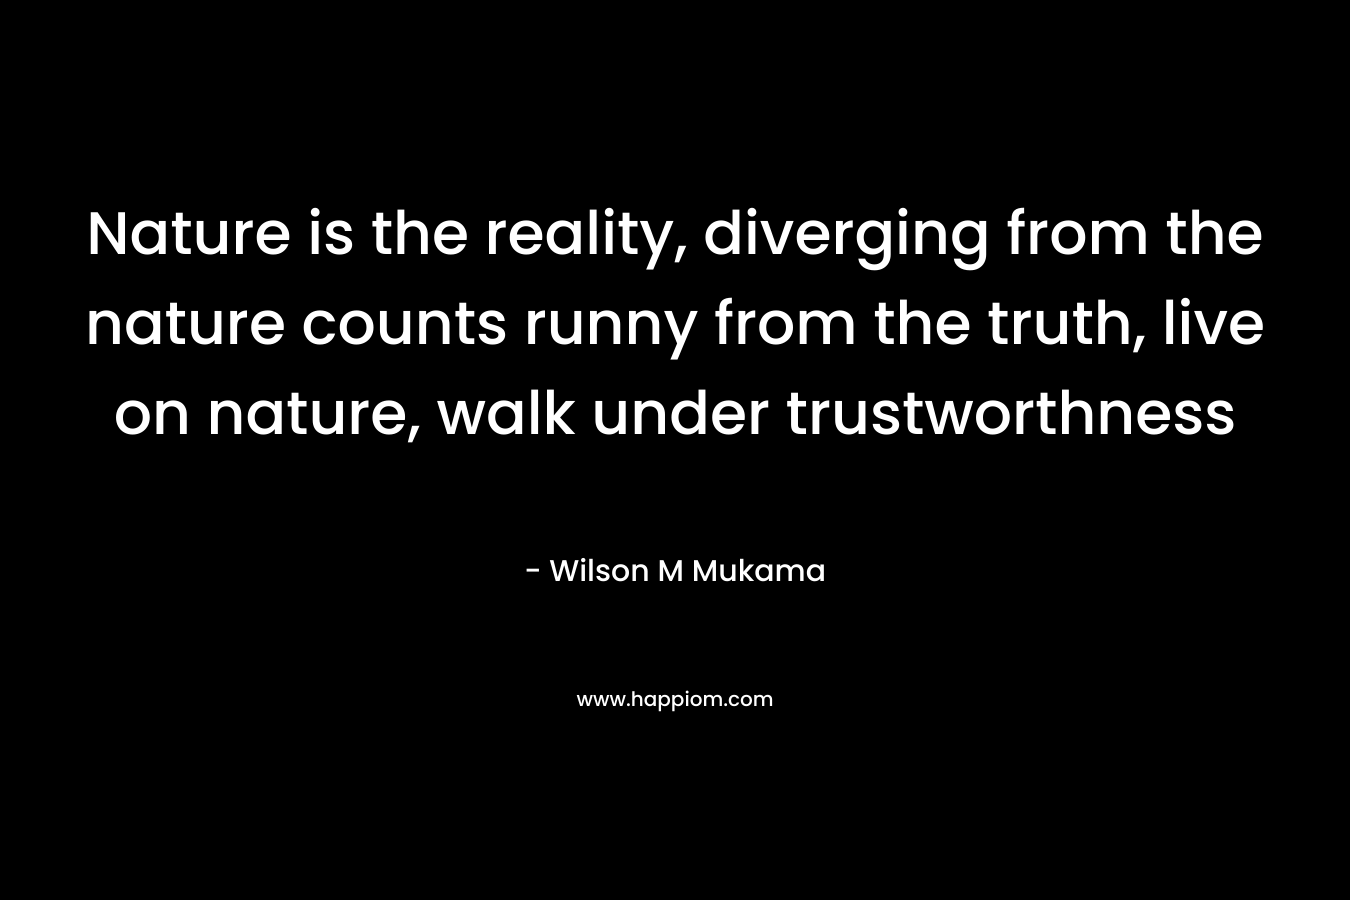 Nature is the reality, diverging from the nature counts runny from the truth, live on nature, walk under trustworthness